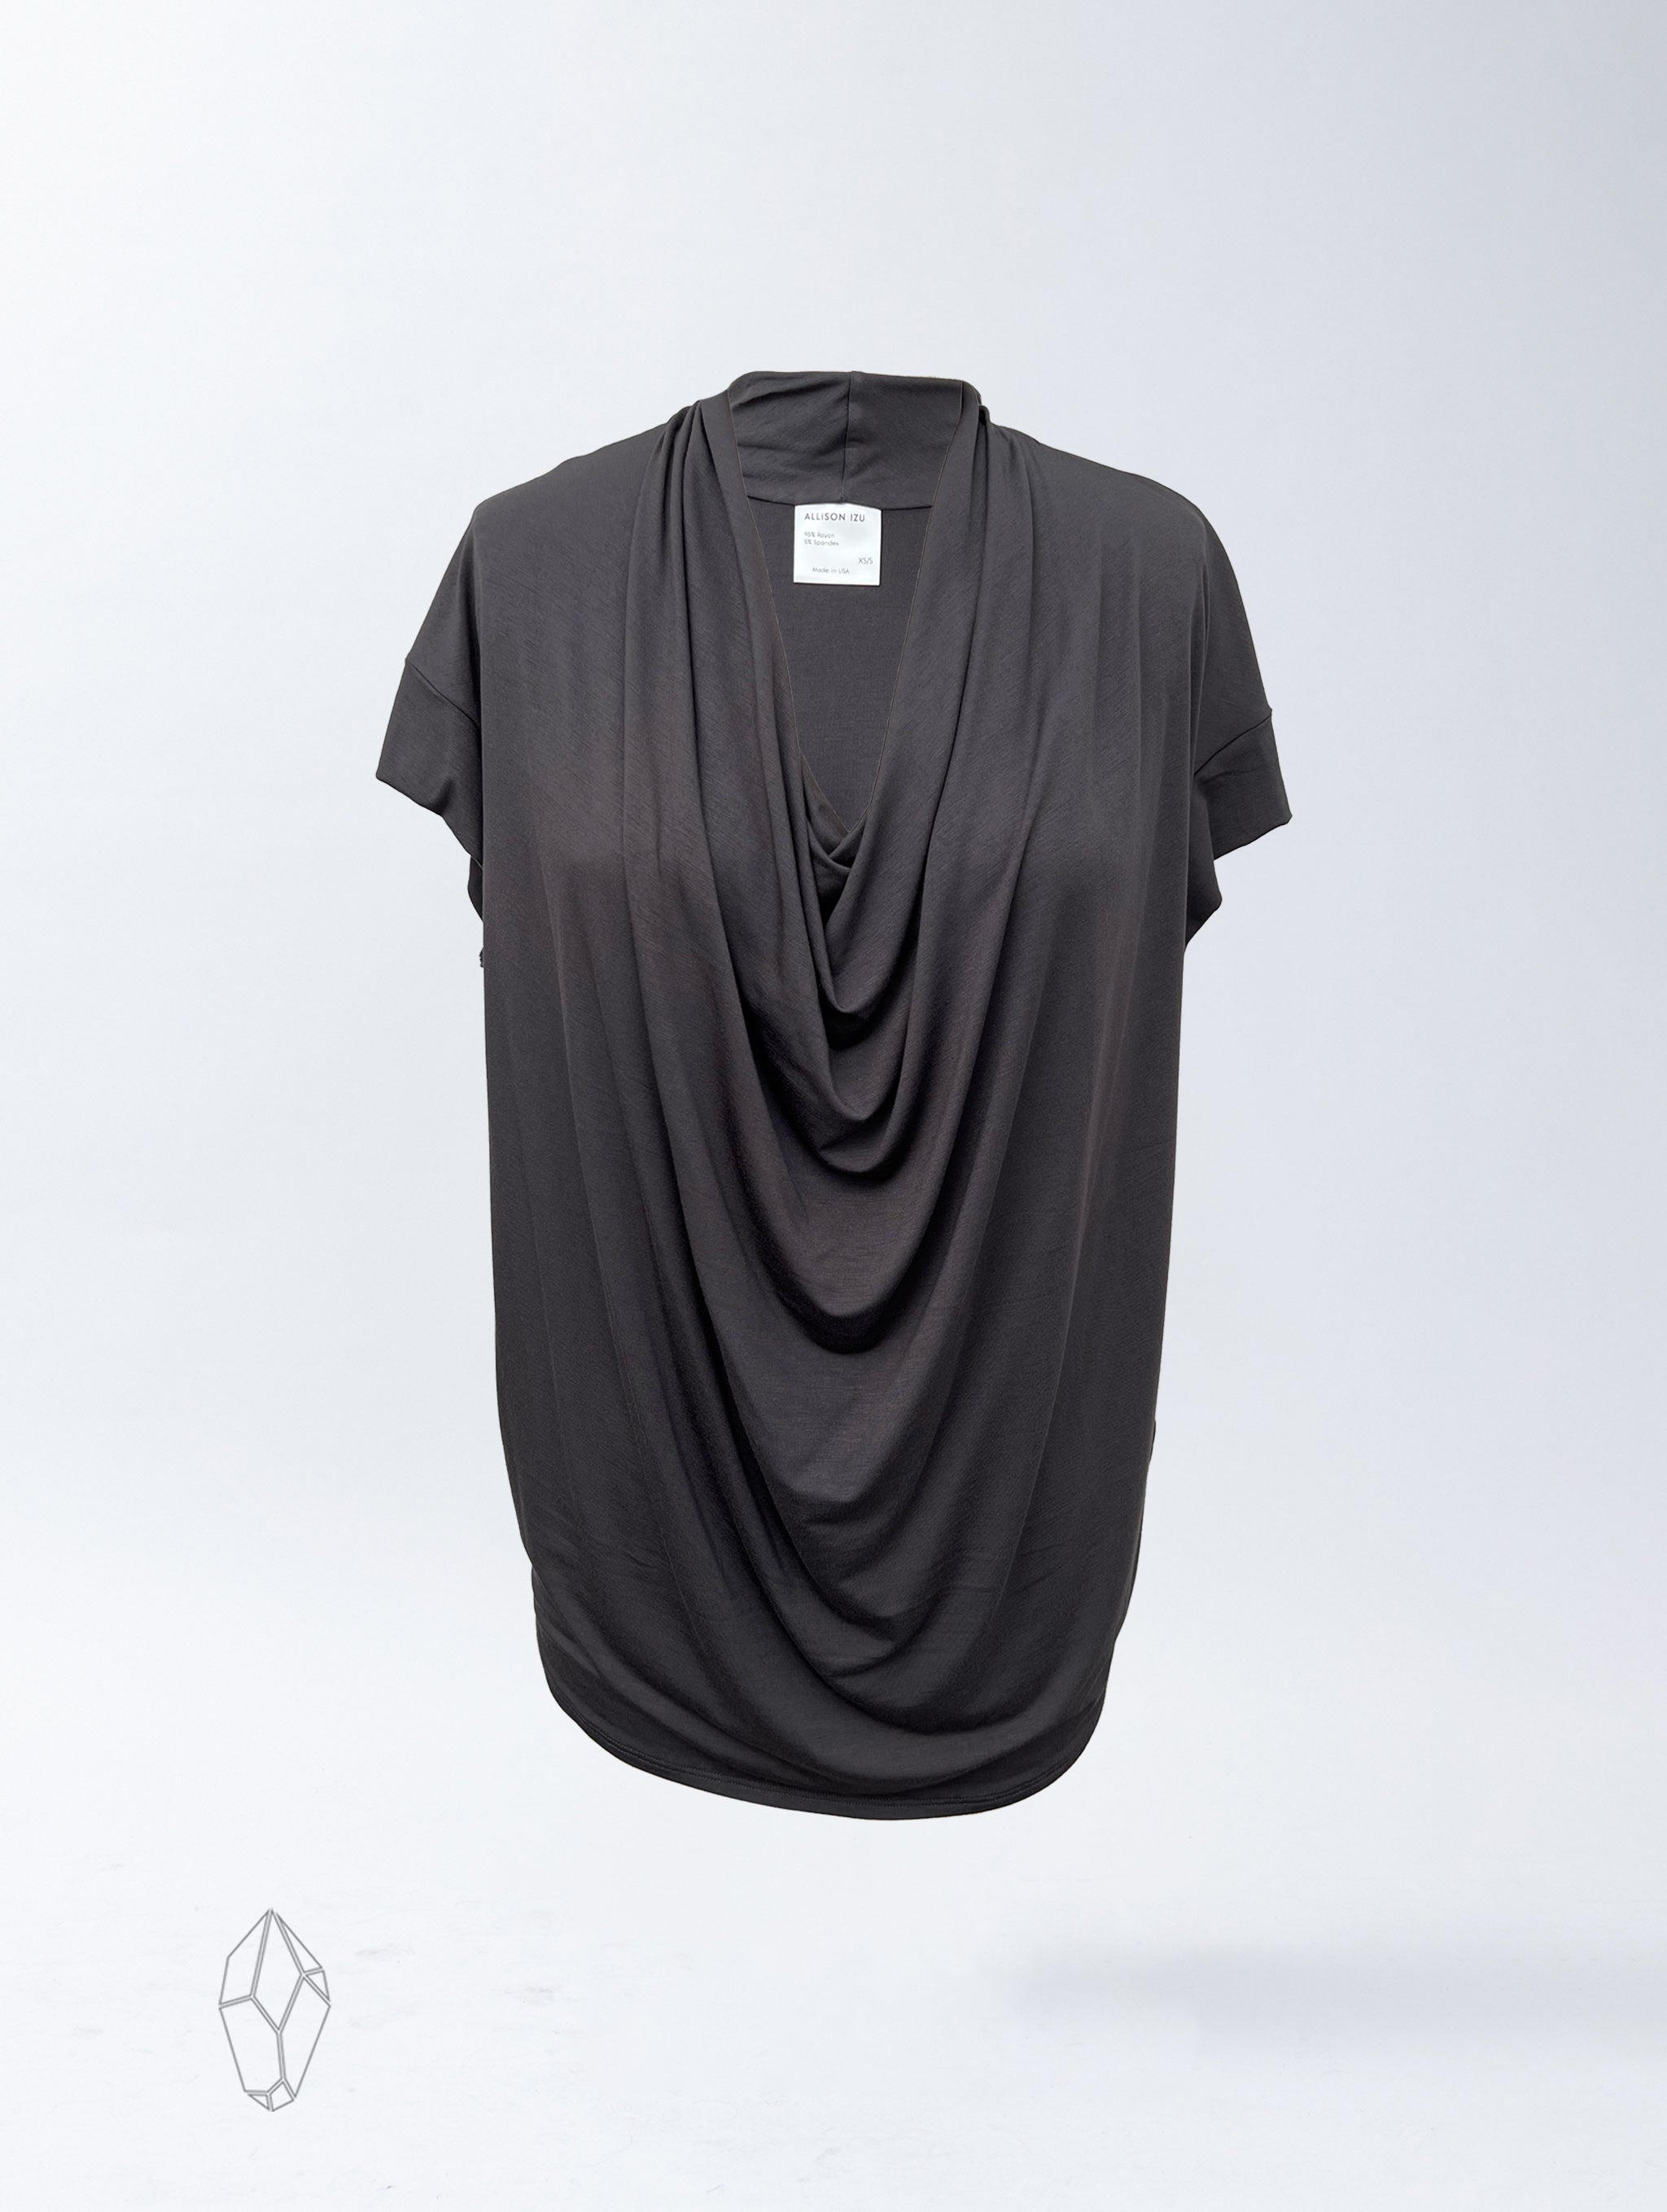 Lily Top - Washed Black Rayon Jersey